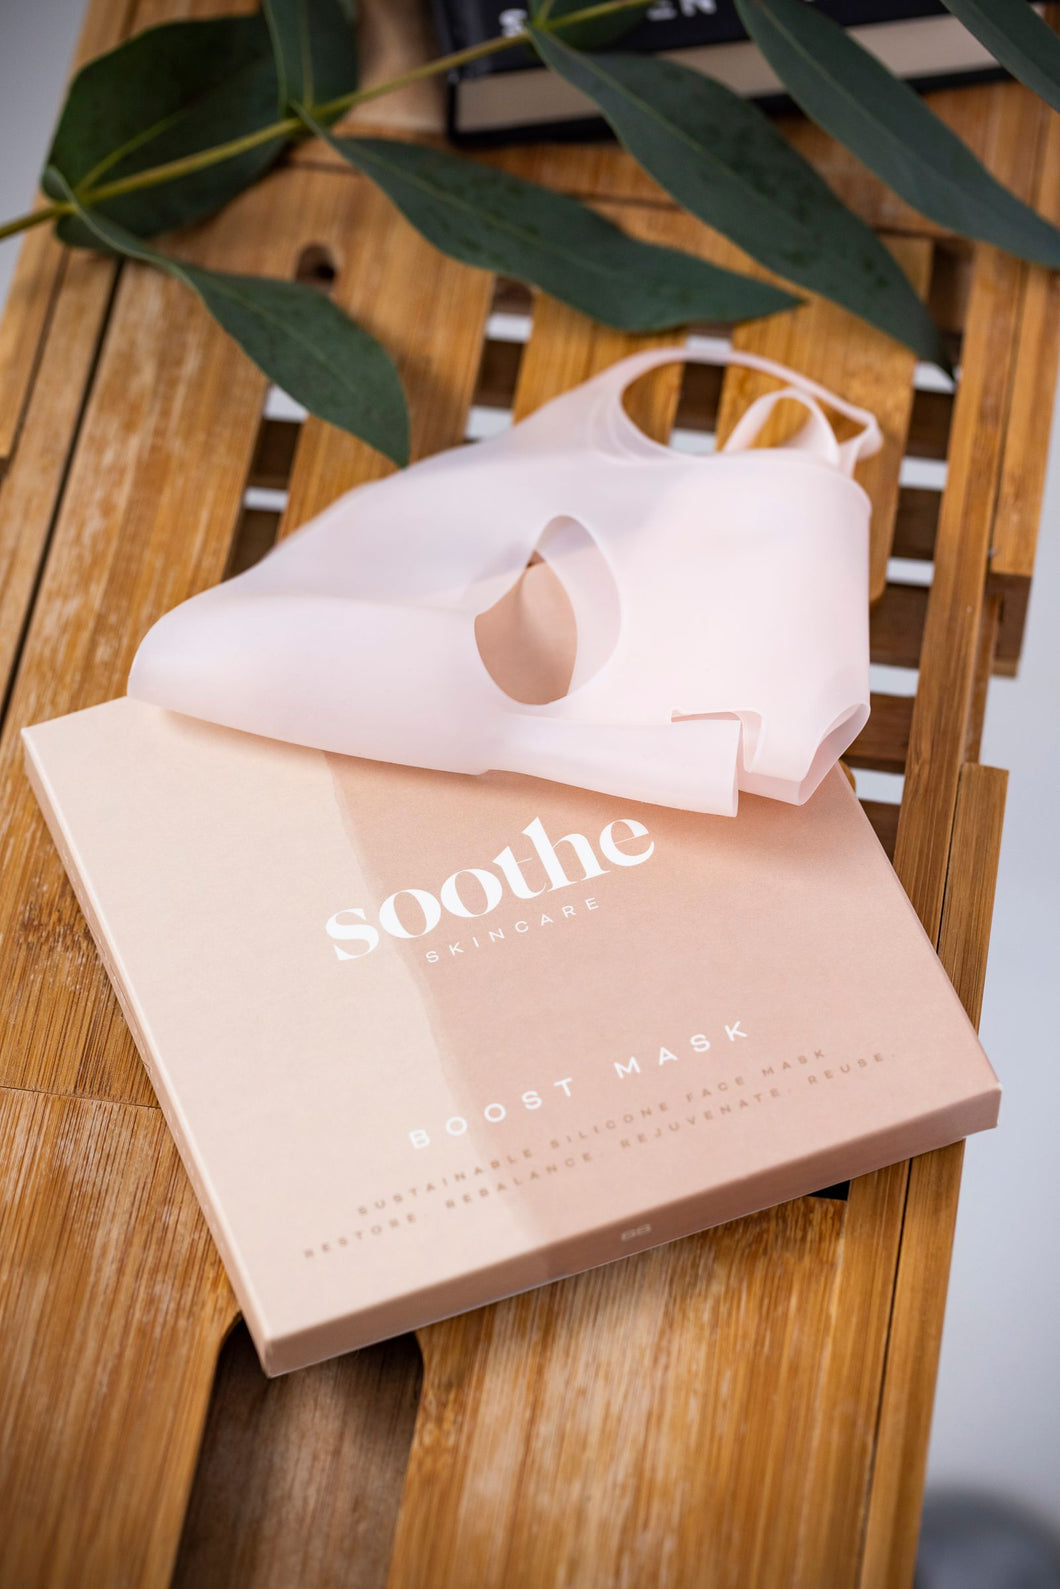 Soothe Skincare Boost Mask